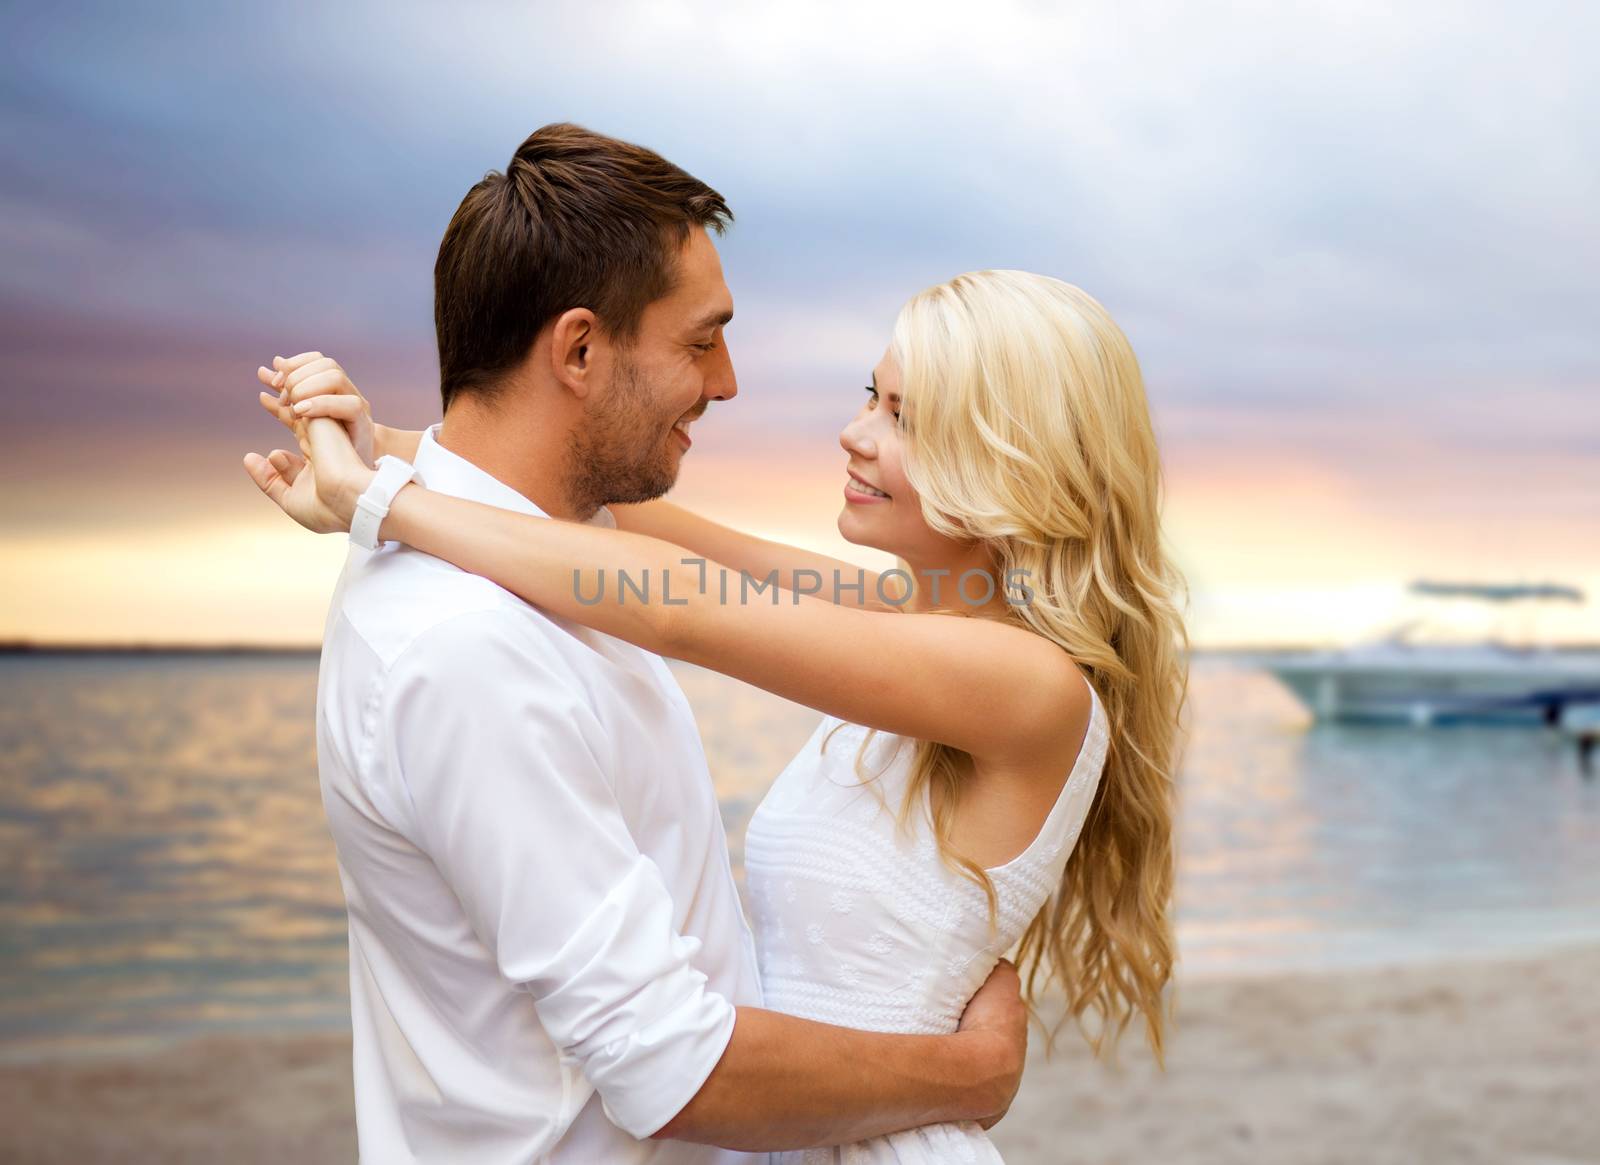 happy couple hugging over sunset beach background by dolgachov